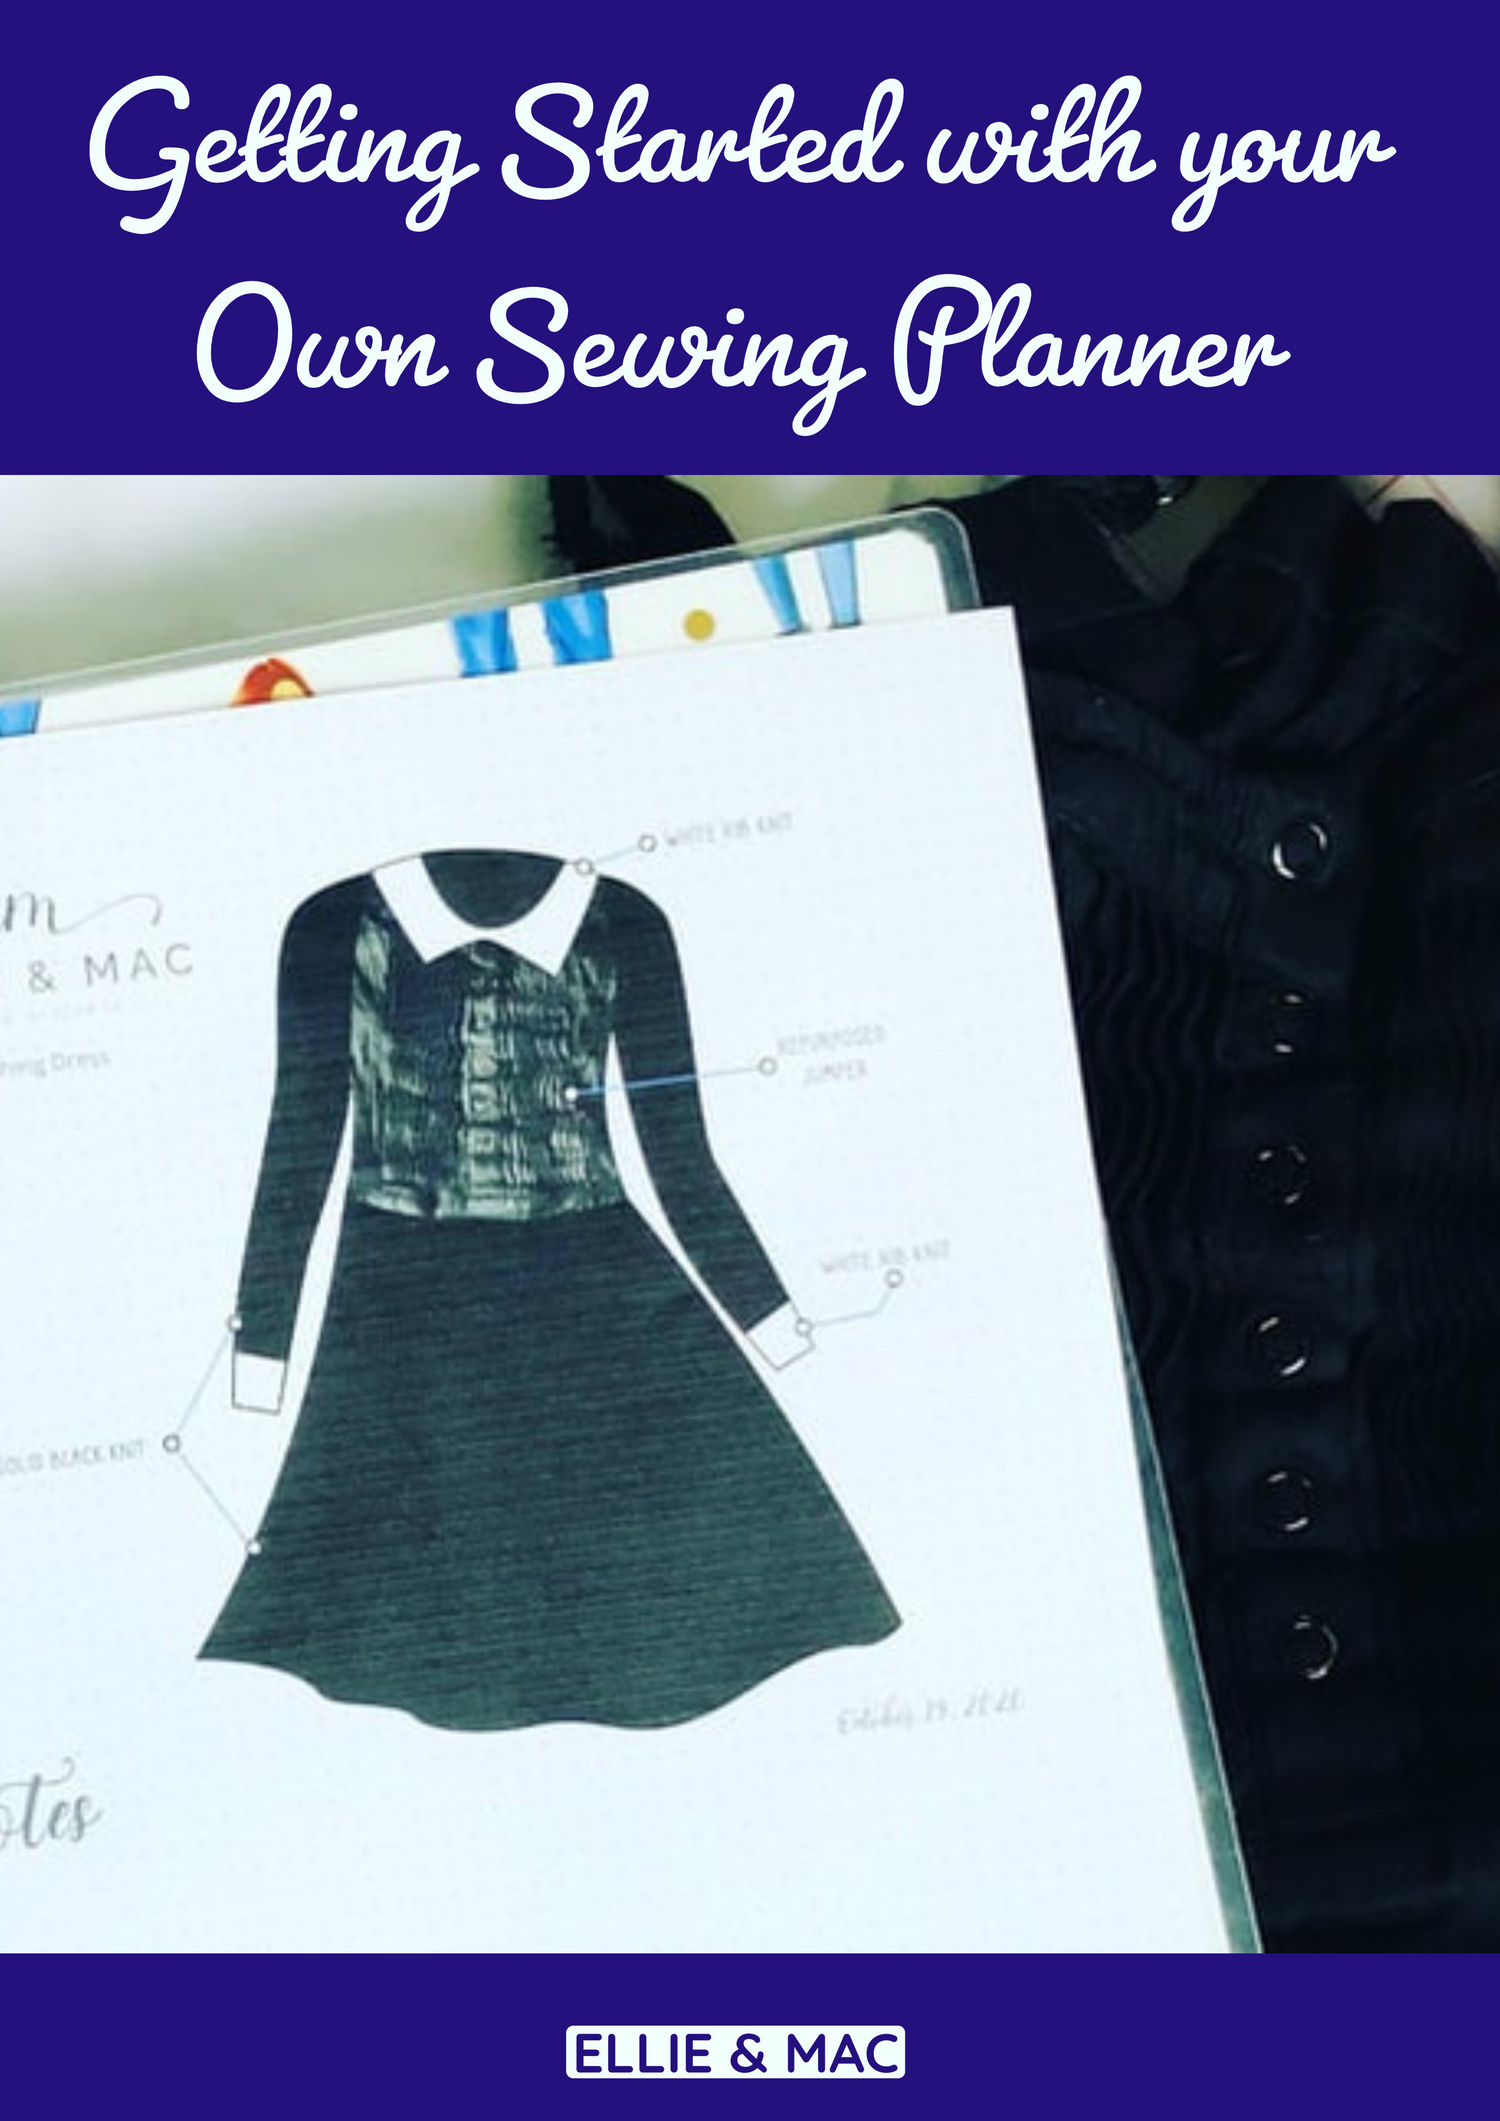 Getting Started with your Own Sewing Planner